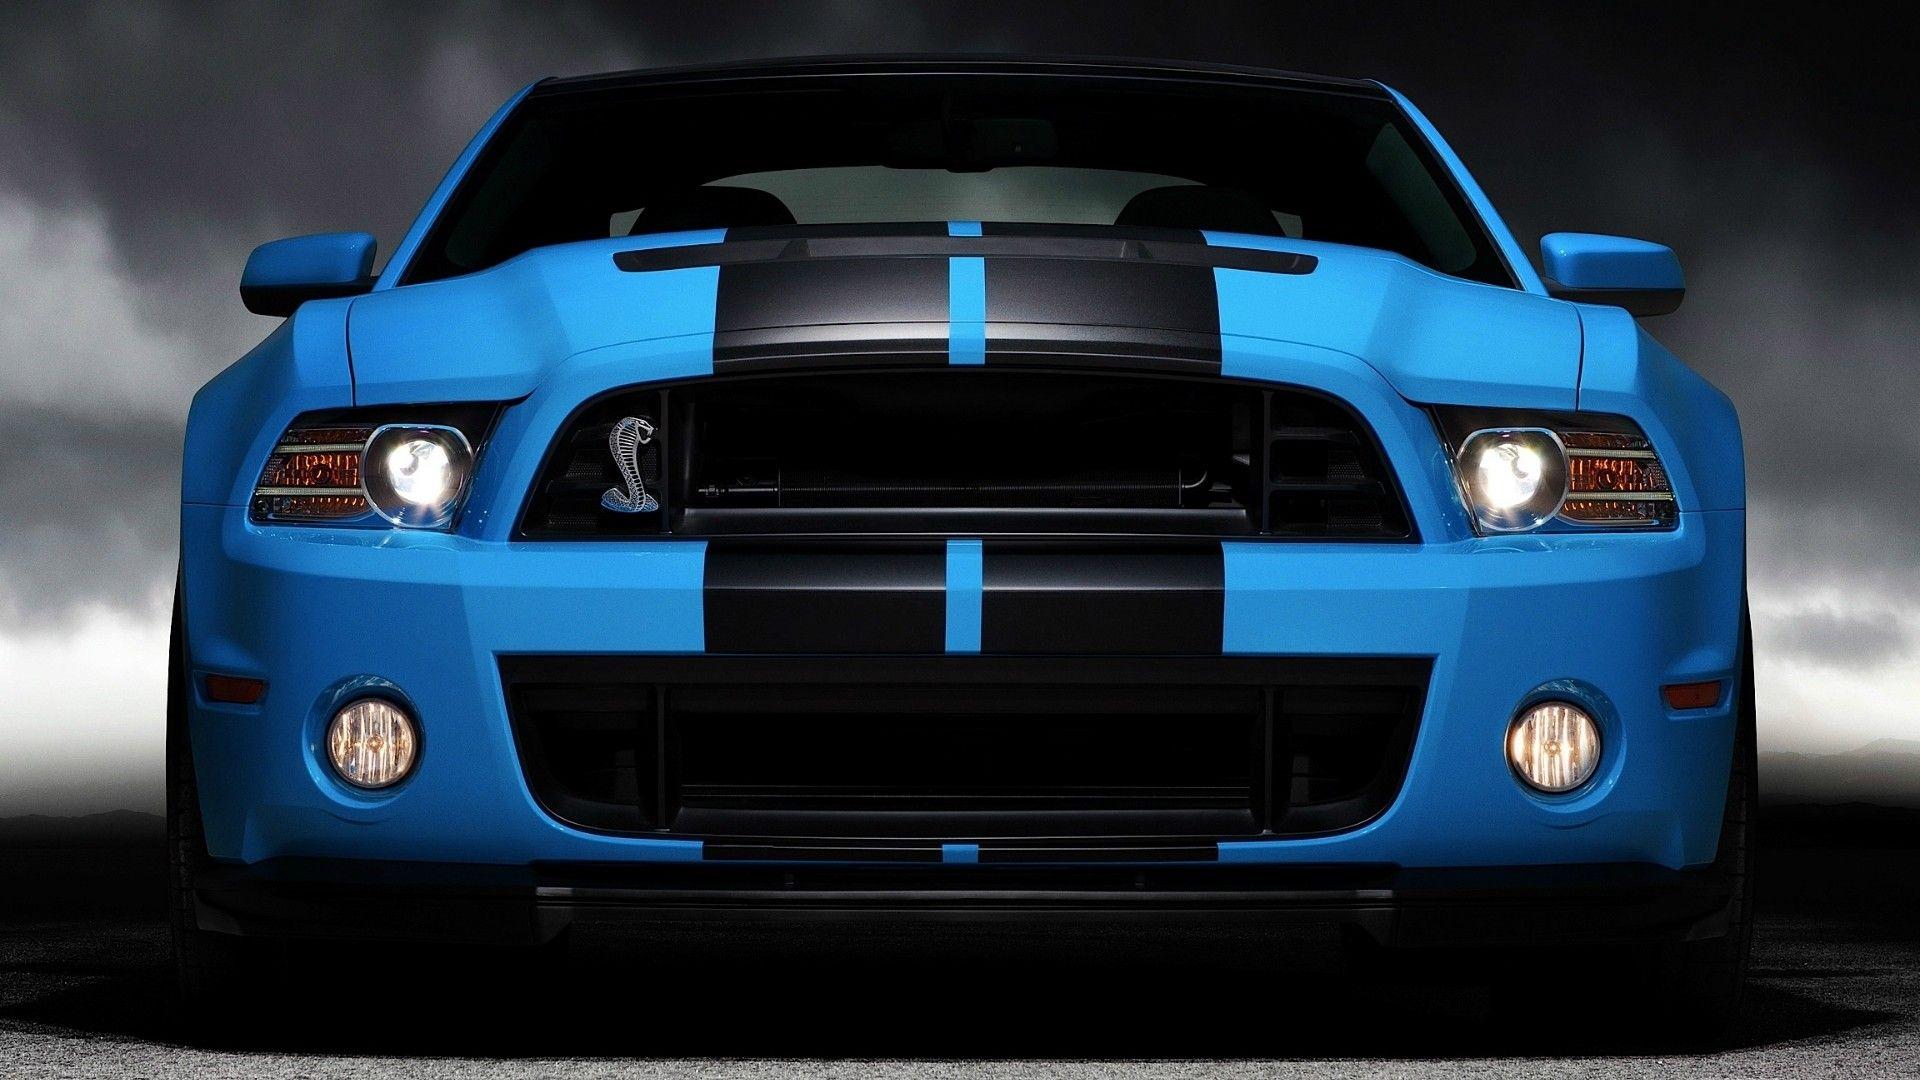 Blue cars vehicles Ford Mustang Ford Shelby Ford Mustang Shelby